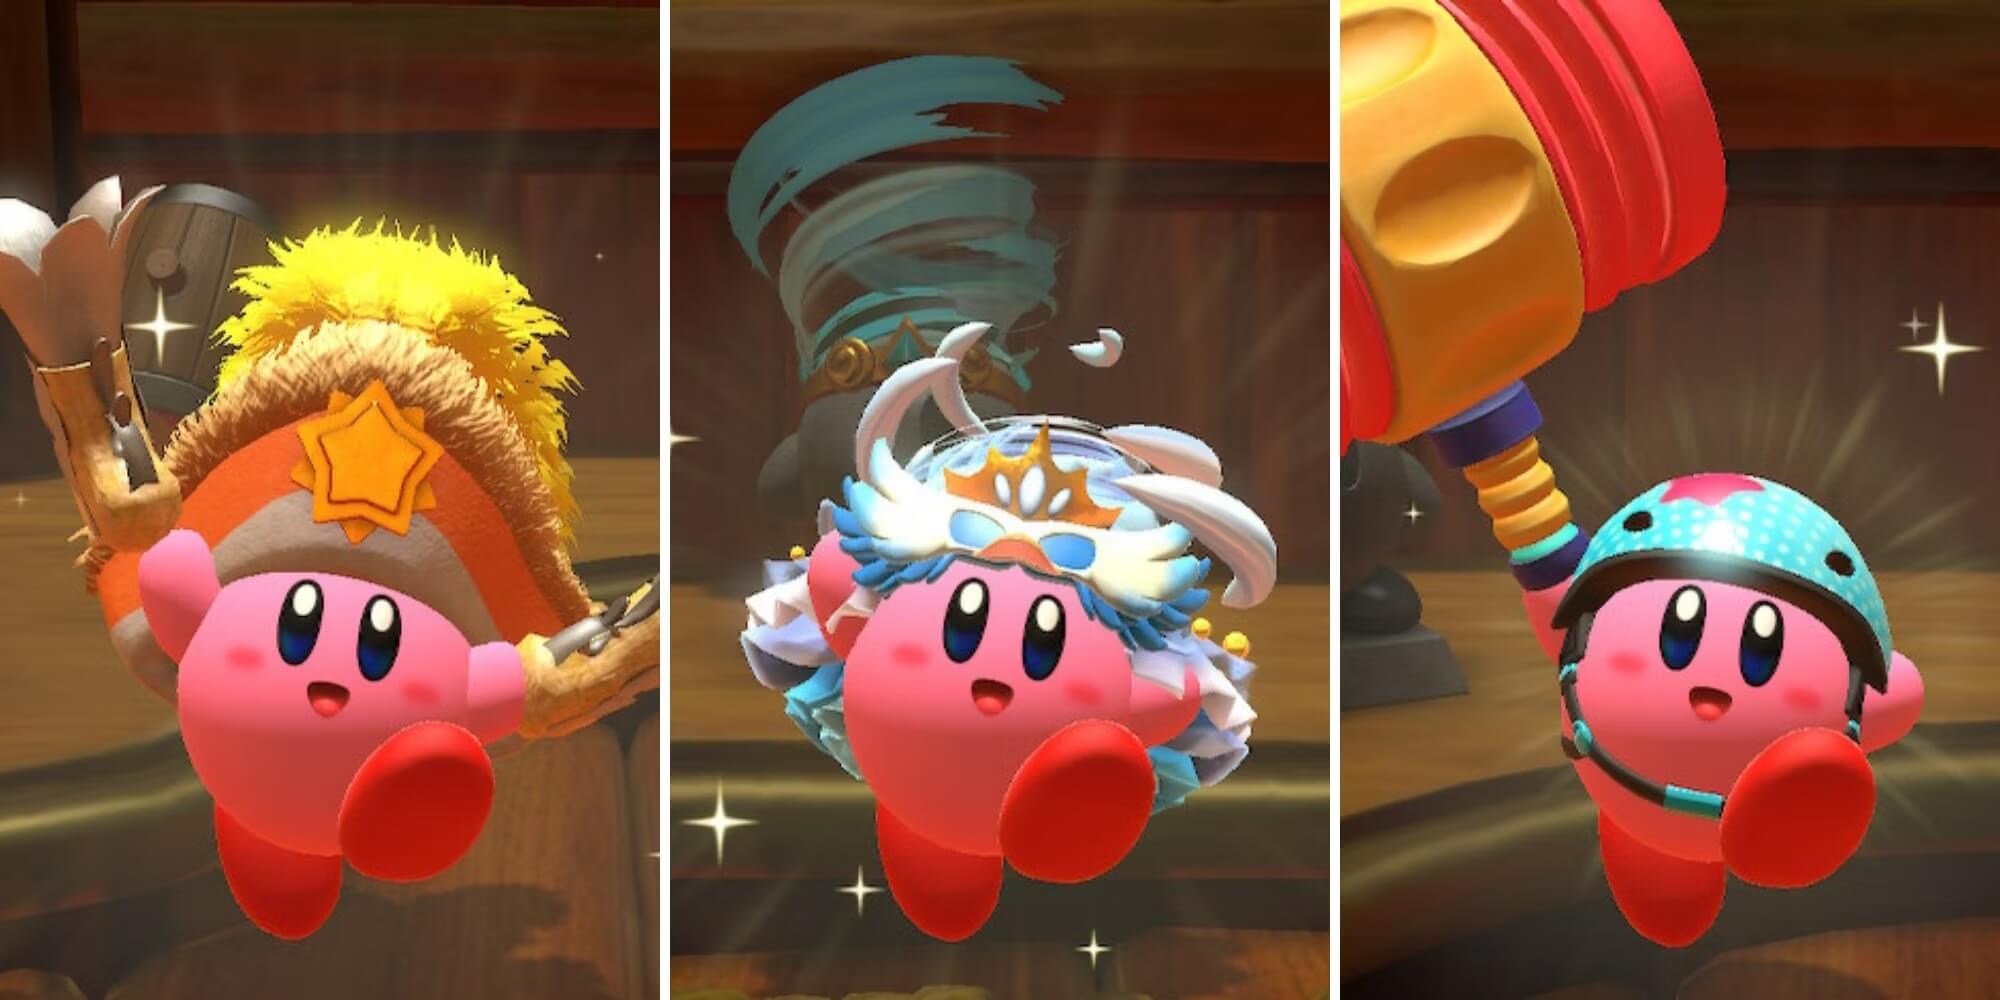 Noble Ranger Kirby, Fleur Tornado Kirby and Toy Hammer Kirby